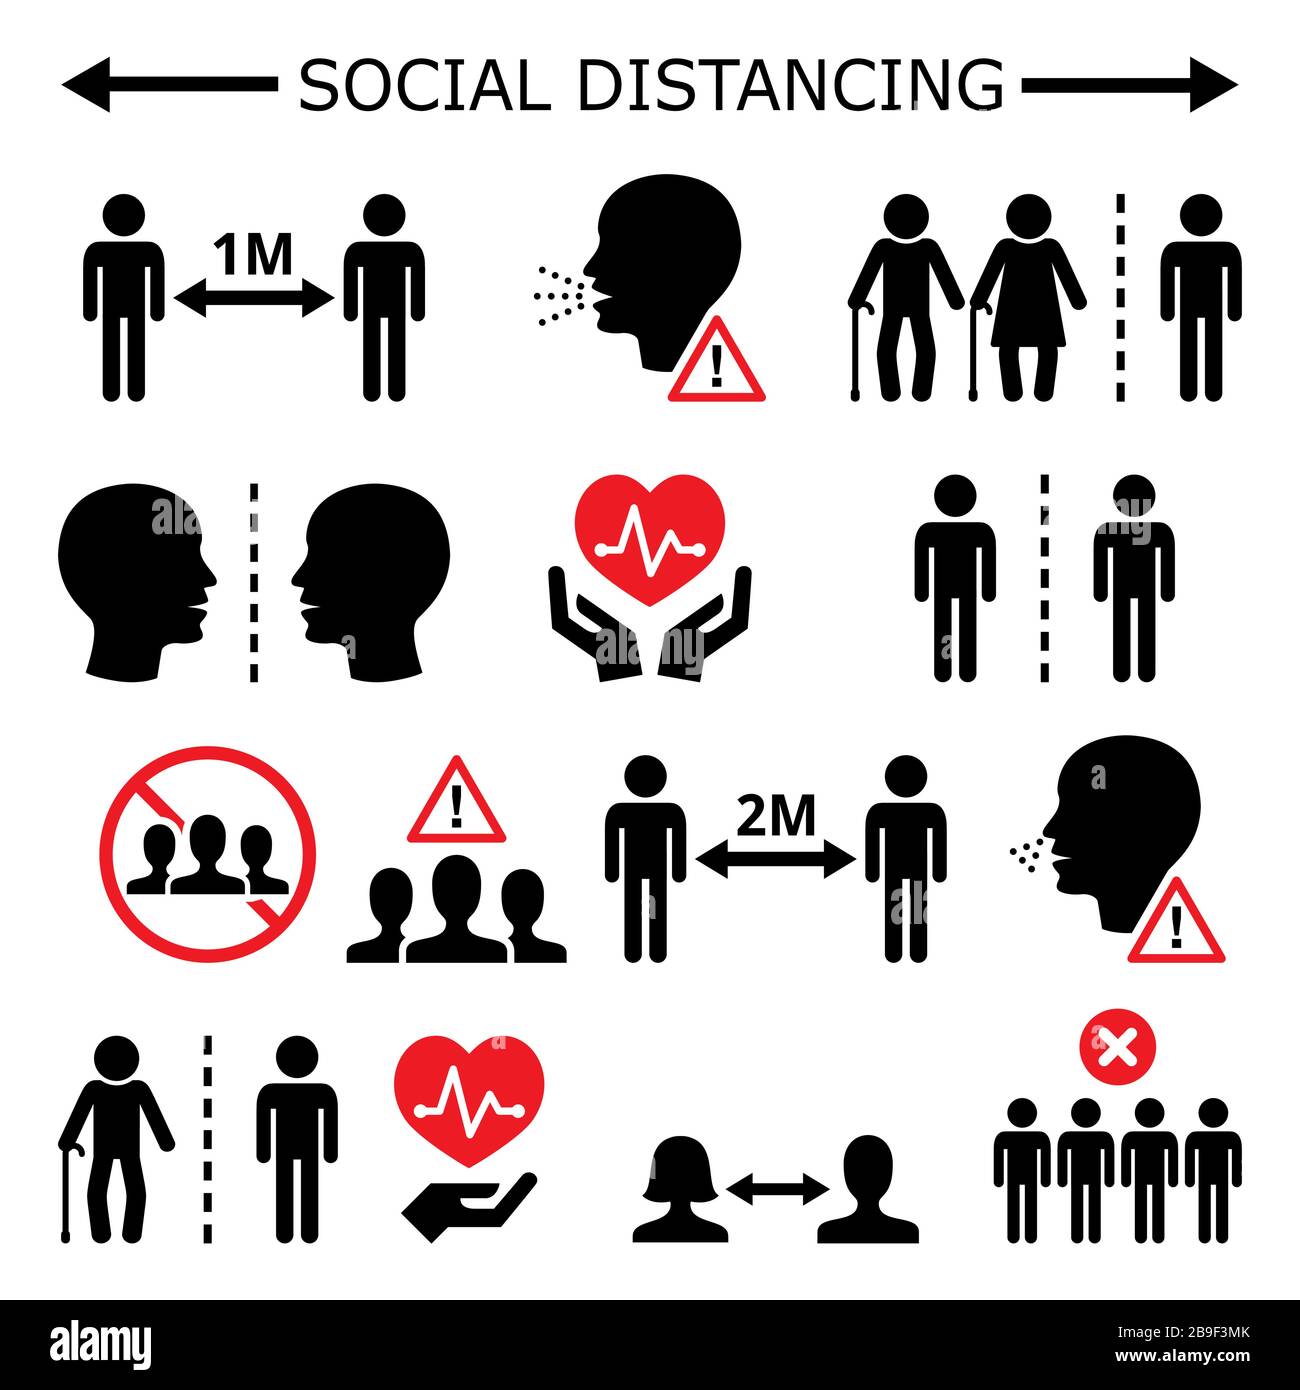 Social distancing during pandemic or epidemic vector icons set, keeping a distance between people, self-quarantine and self-isolation in society conce Stock Vector